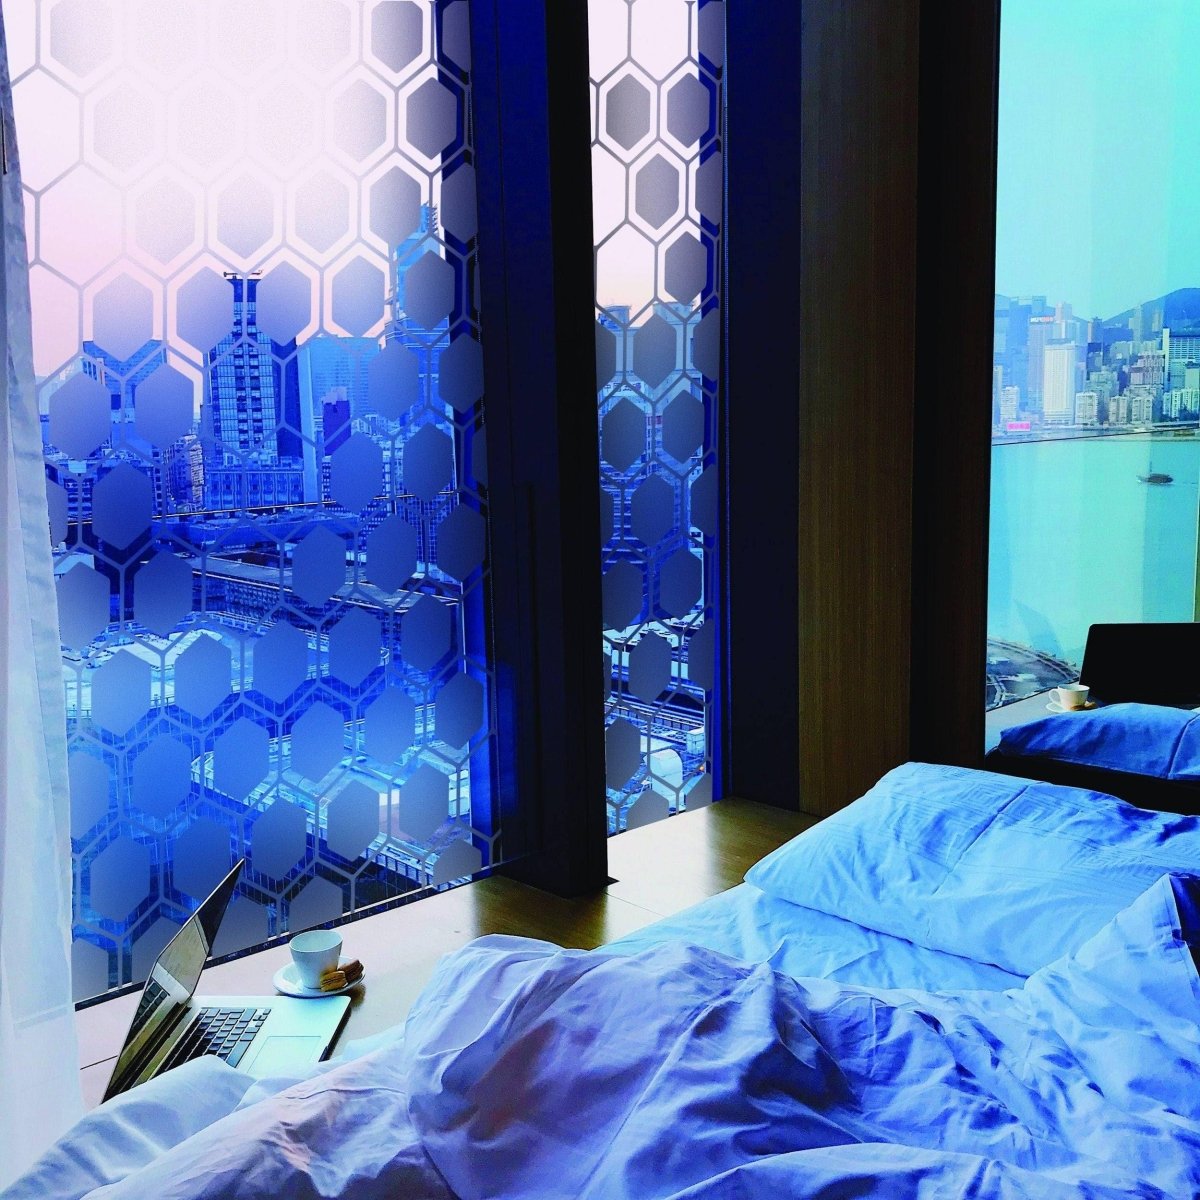 Elegant Privacy Glass Film: Enhance Style and Seclusion - Decords